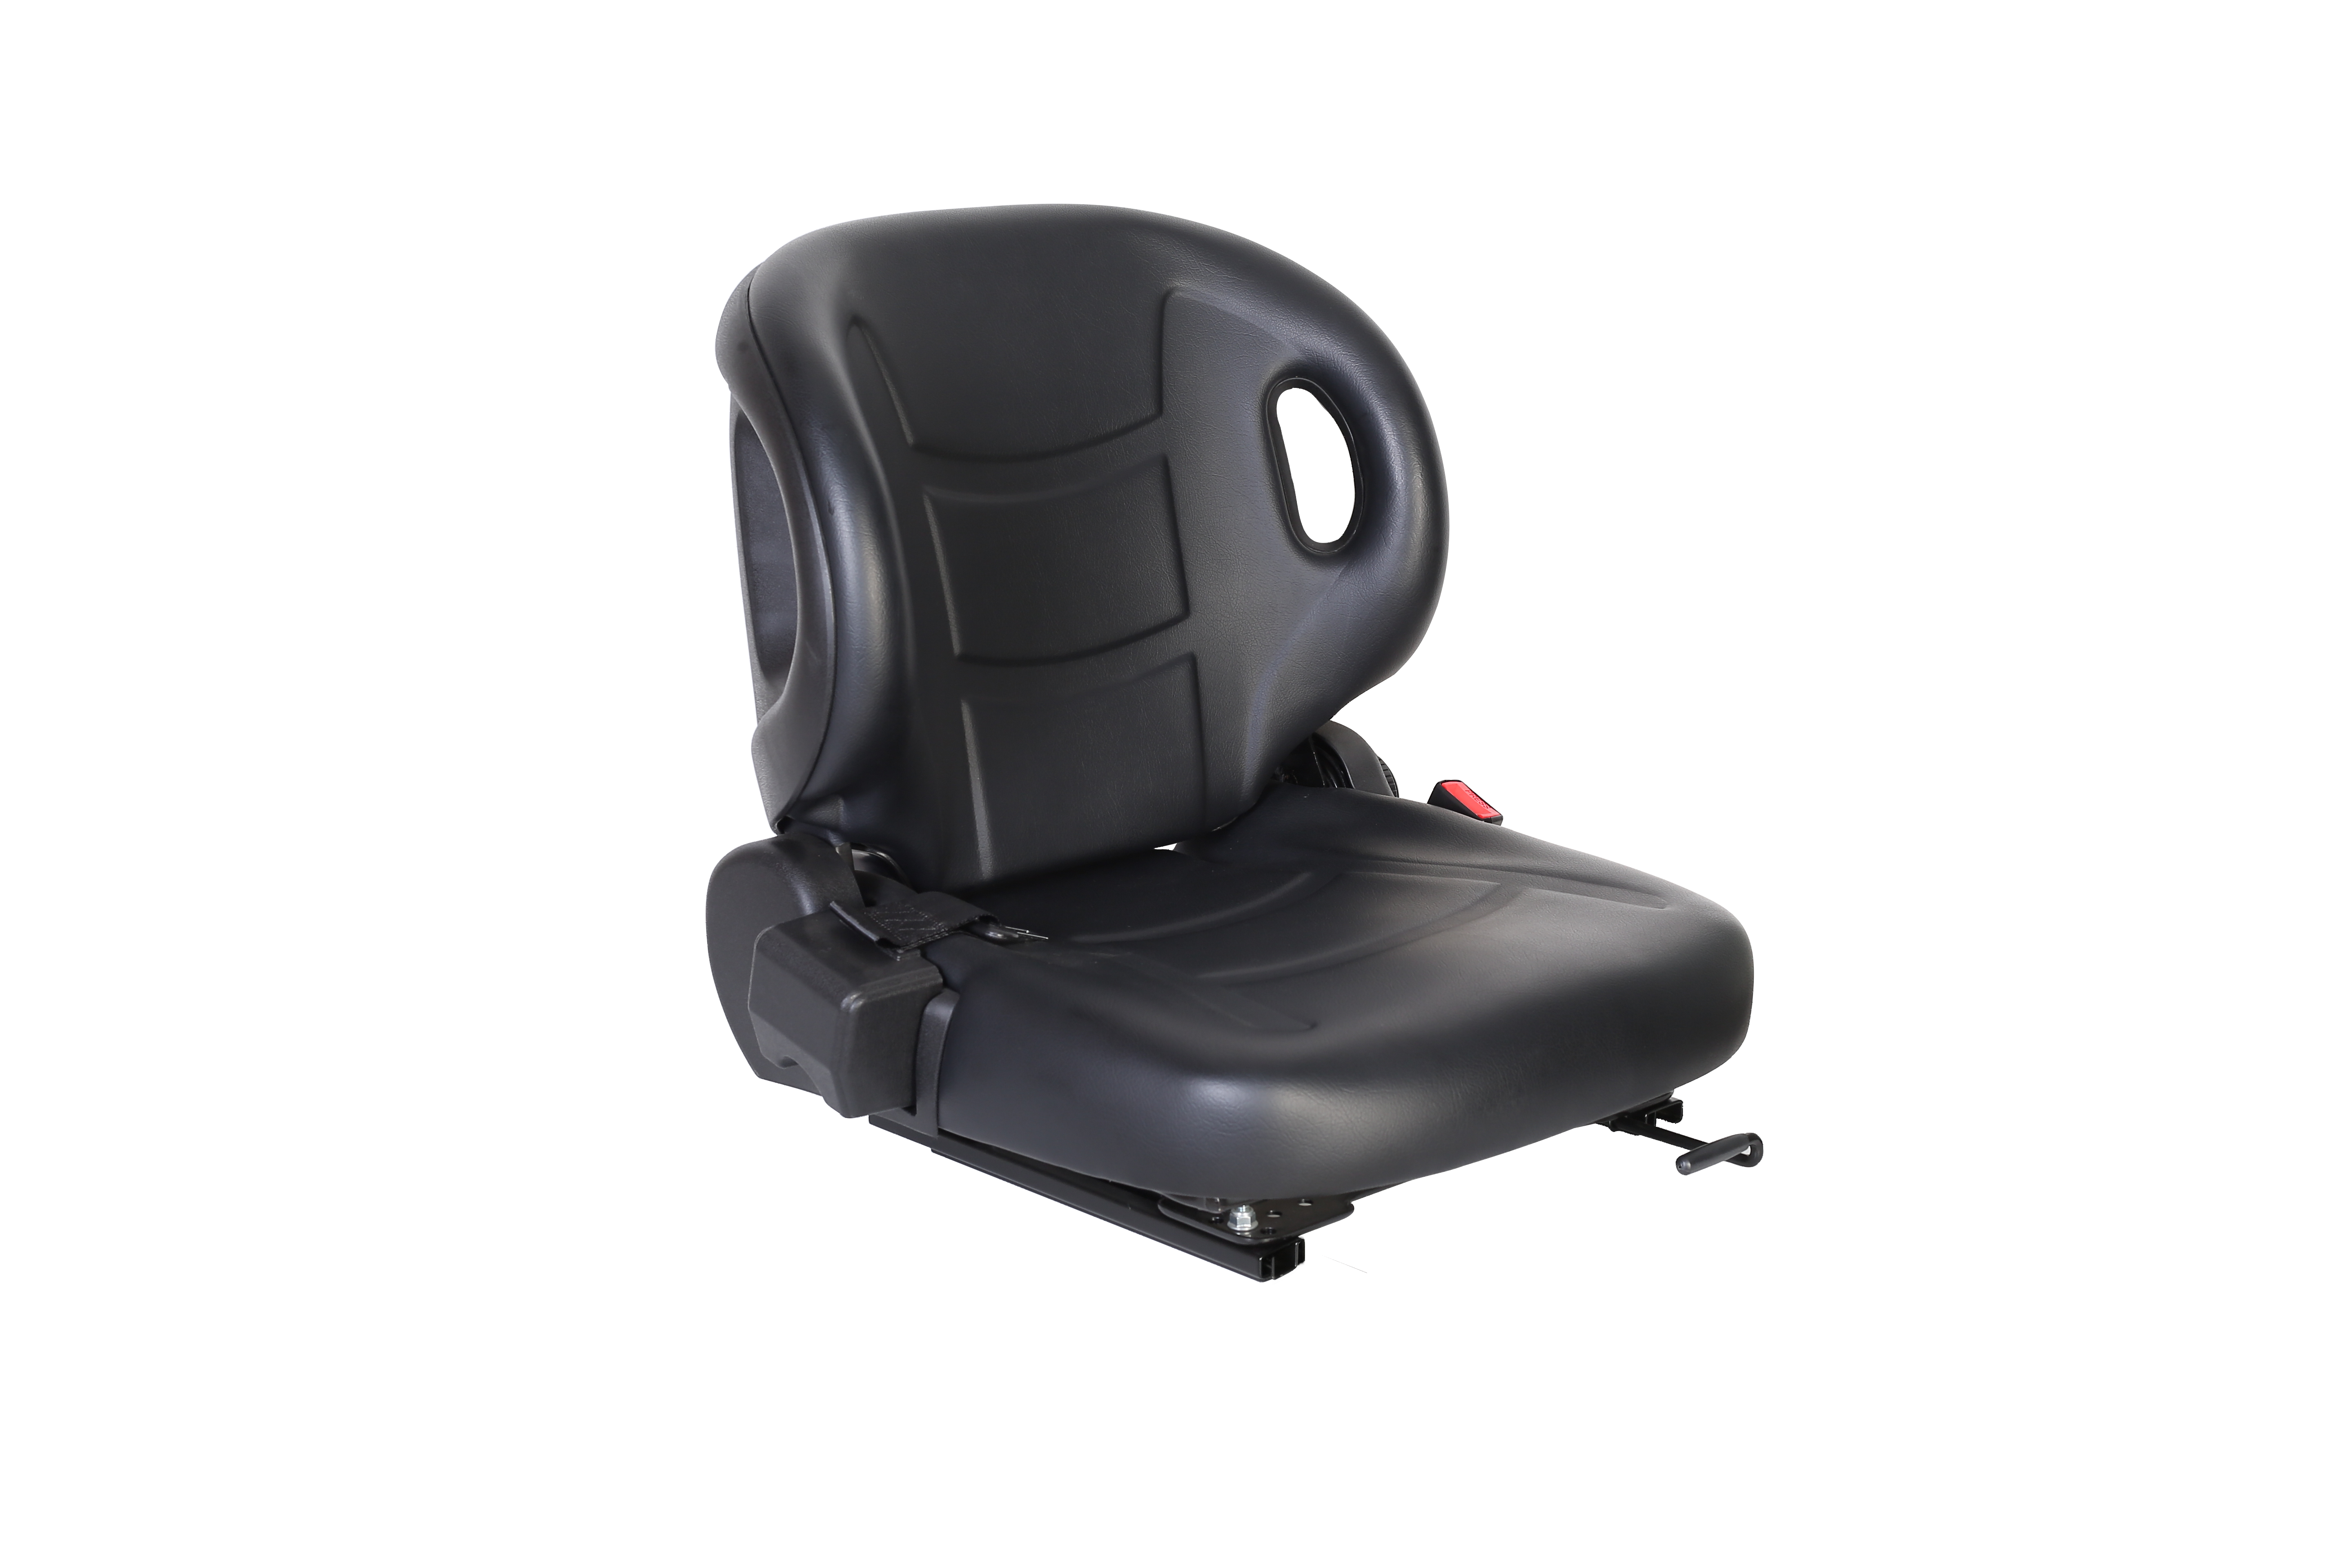 Comfortable Forklift Seat with Universal Mounting Design BF2-2 Toyota, Tailift, Jungheinrich, Hc